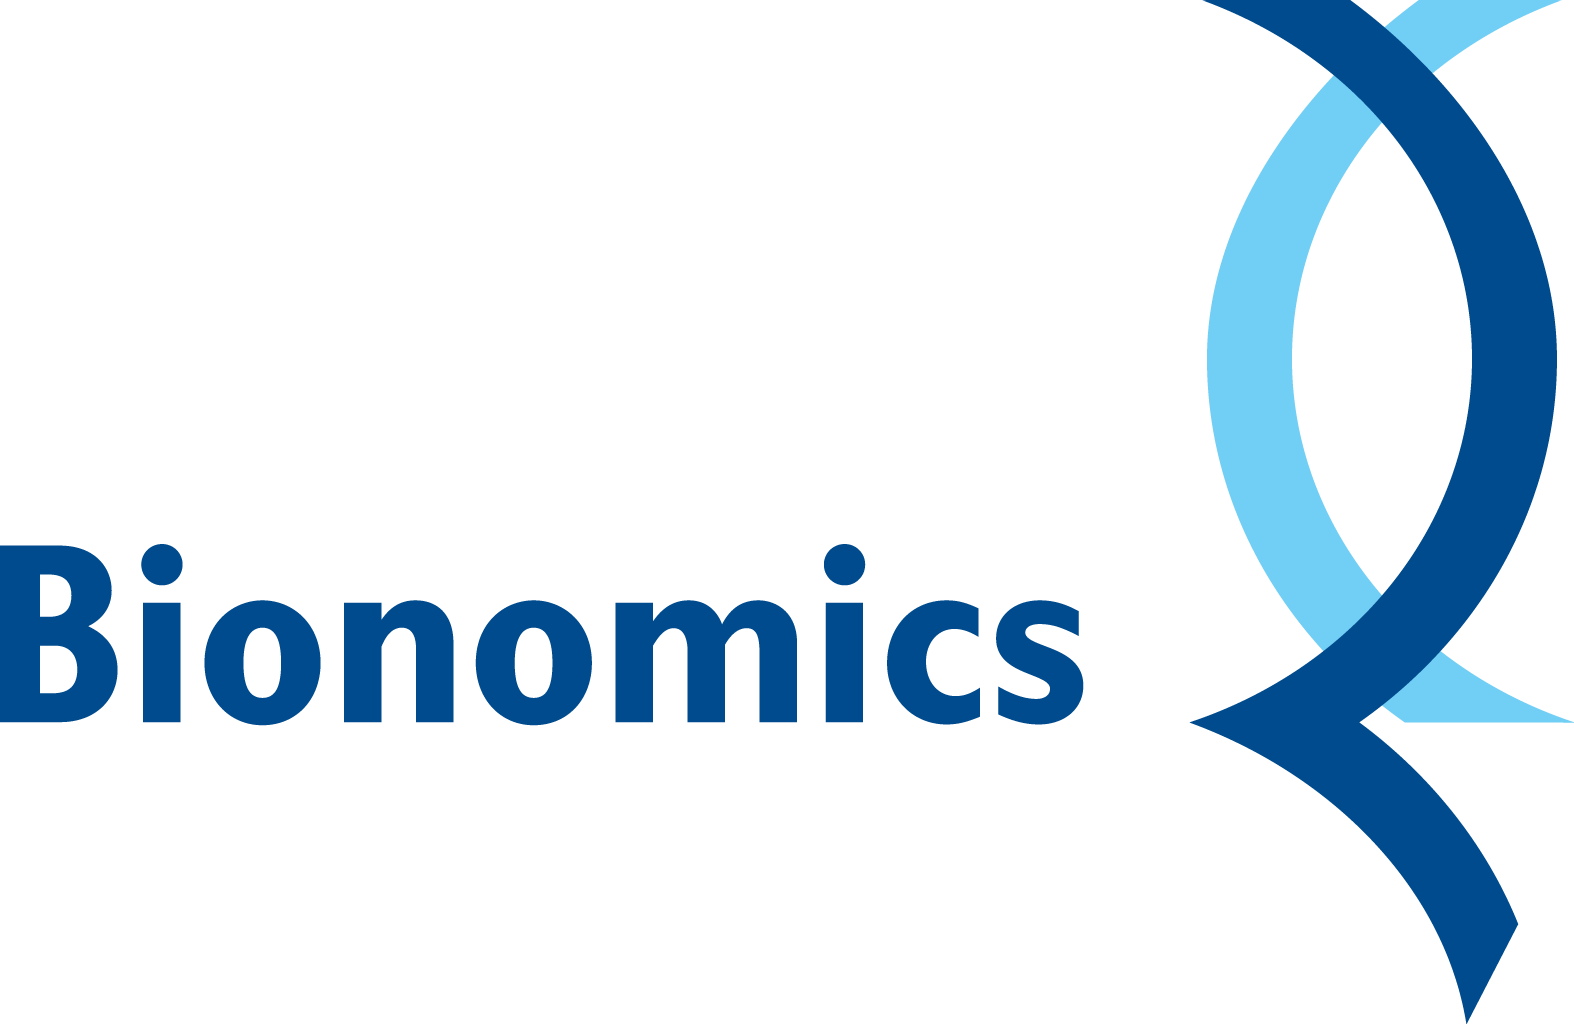 Bionomics Announces Upcoming Poster Presentation at the American Society of Clinical Psychopharmacology (ASCP) Annual Meeting